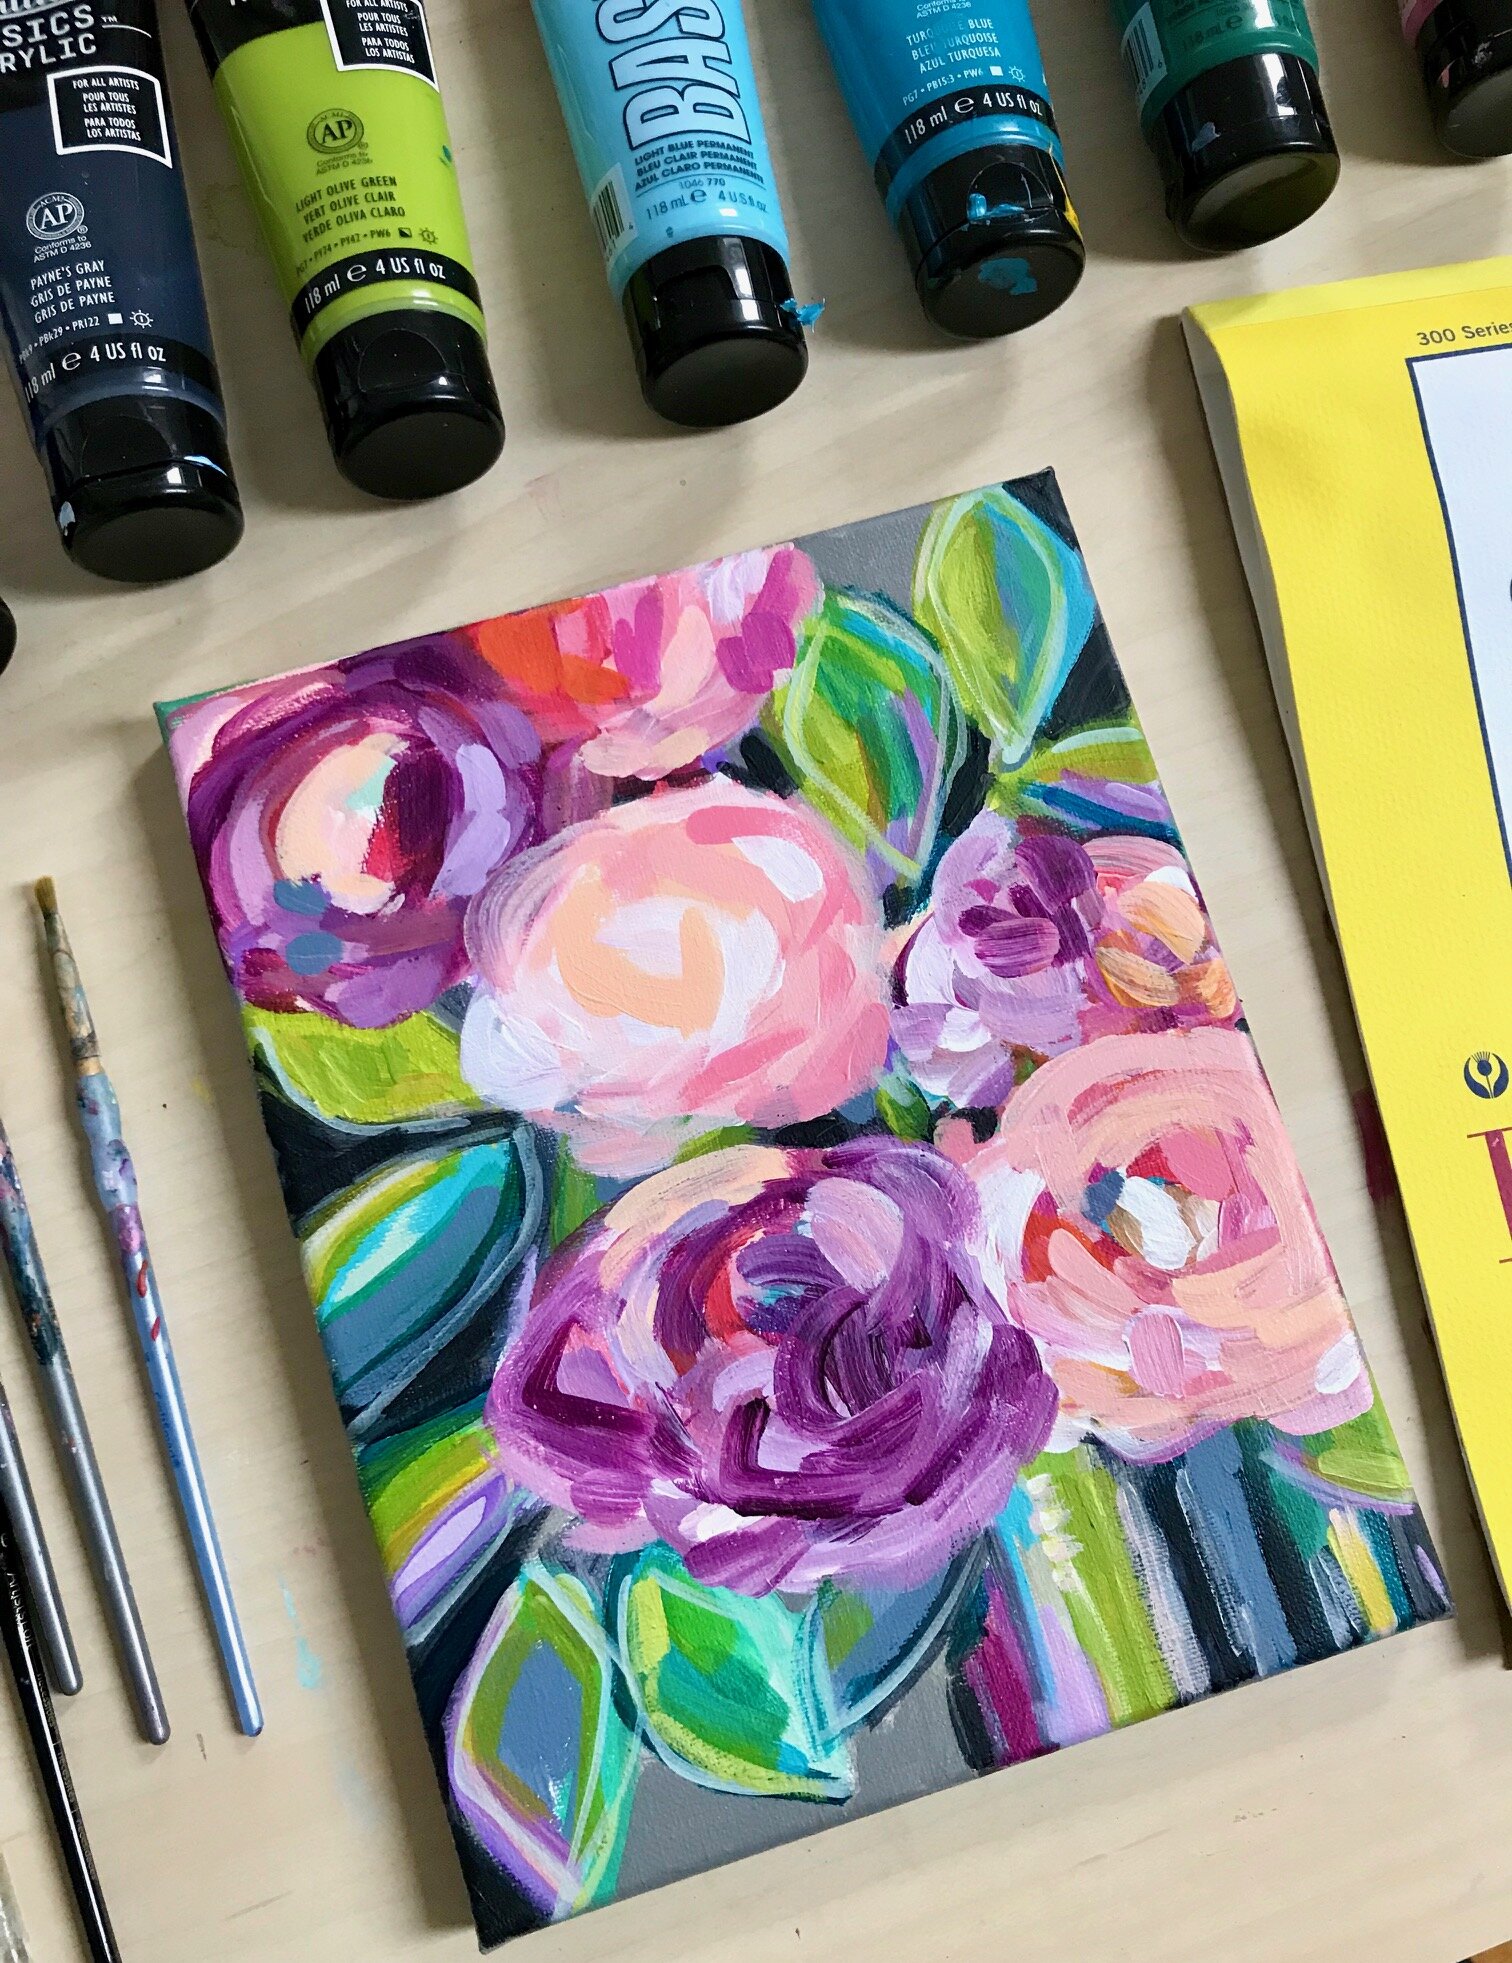 Easy Flower Painting Ideas For